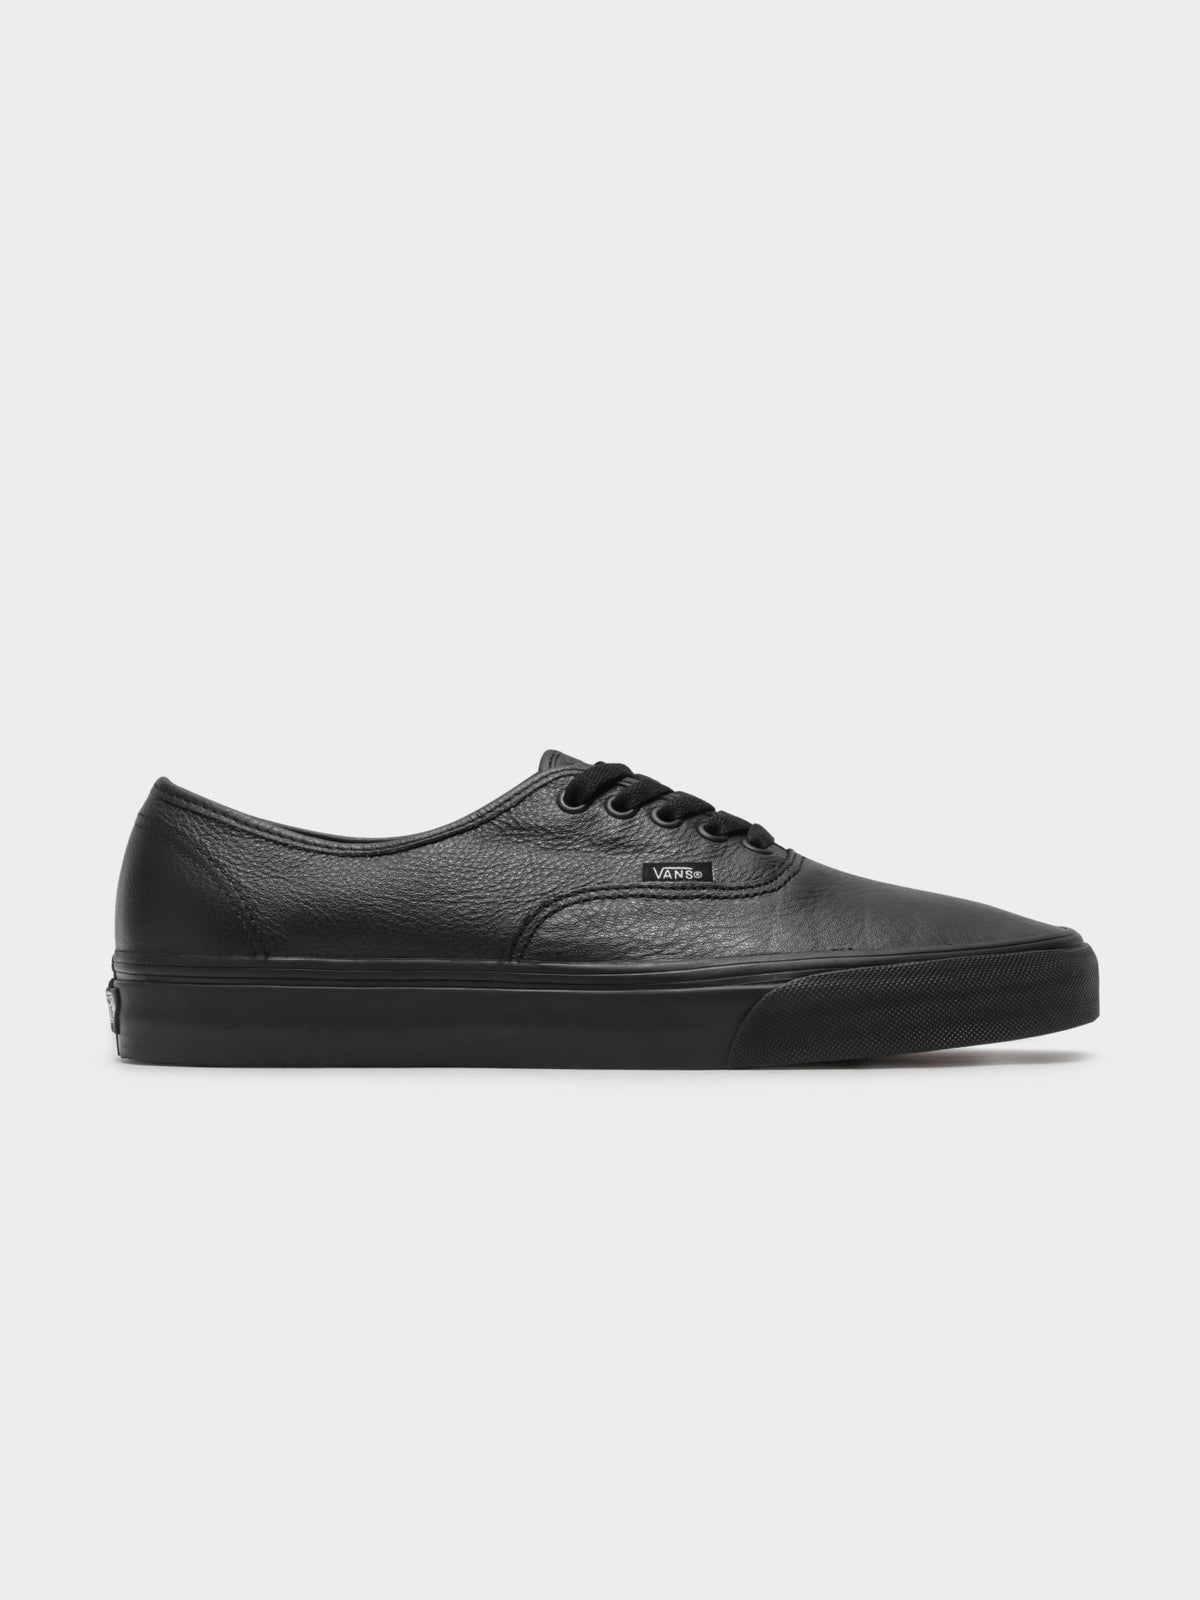 Unisex Authentic Leather Sneakers in Black